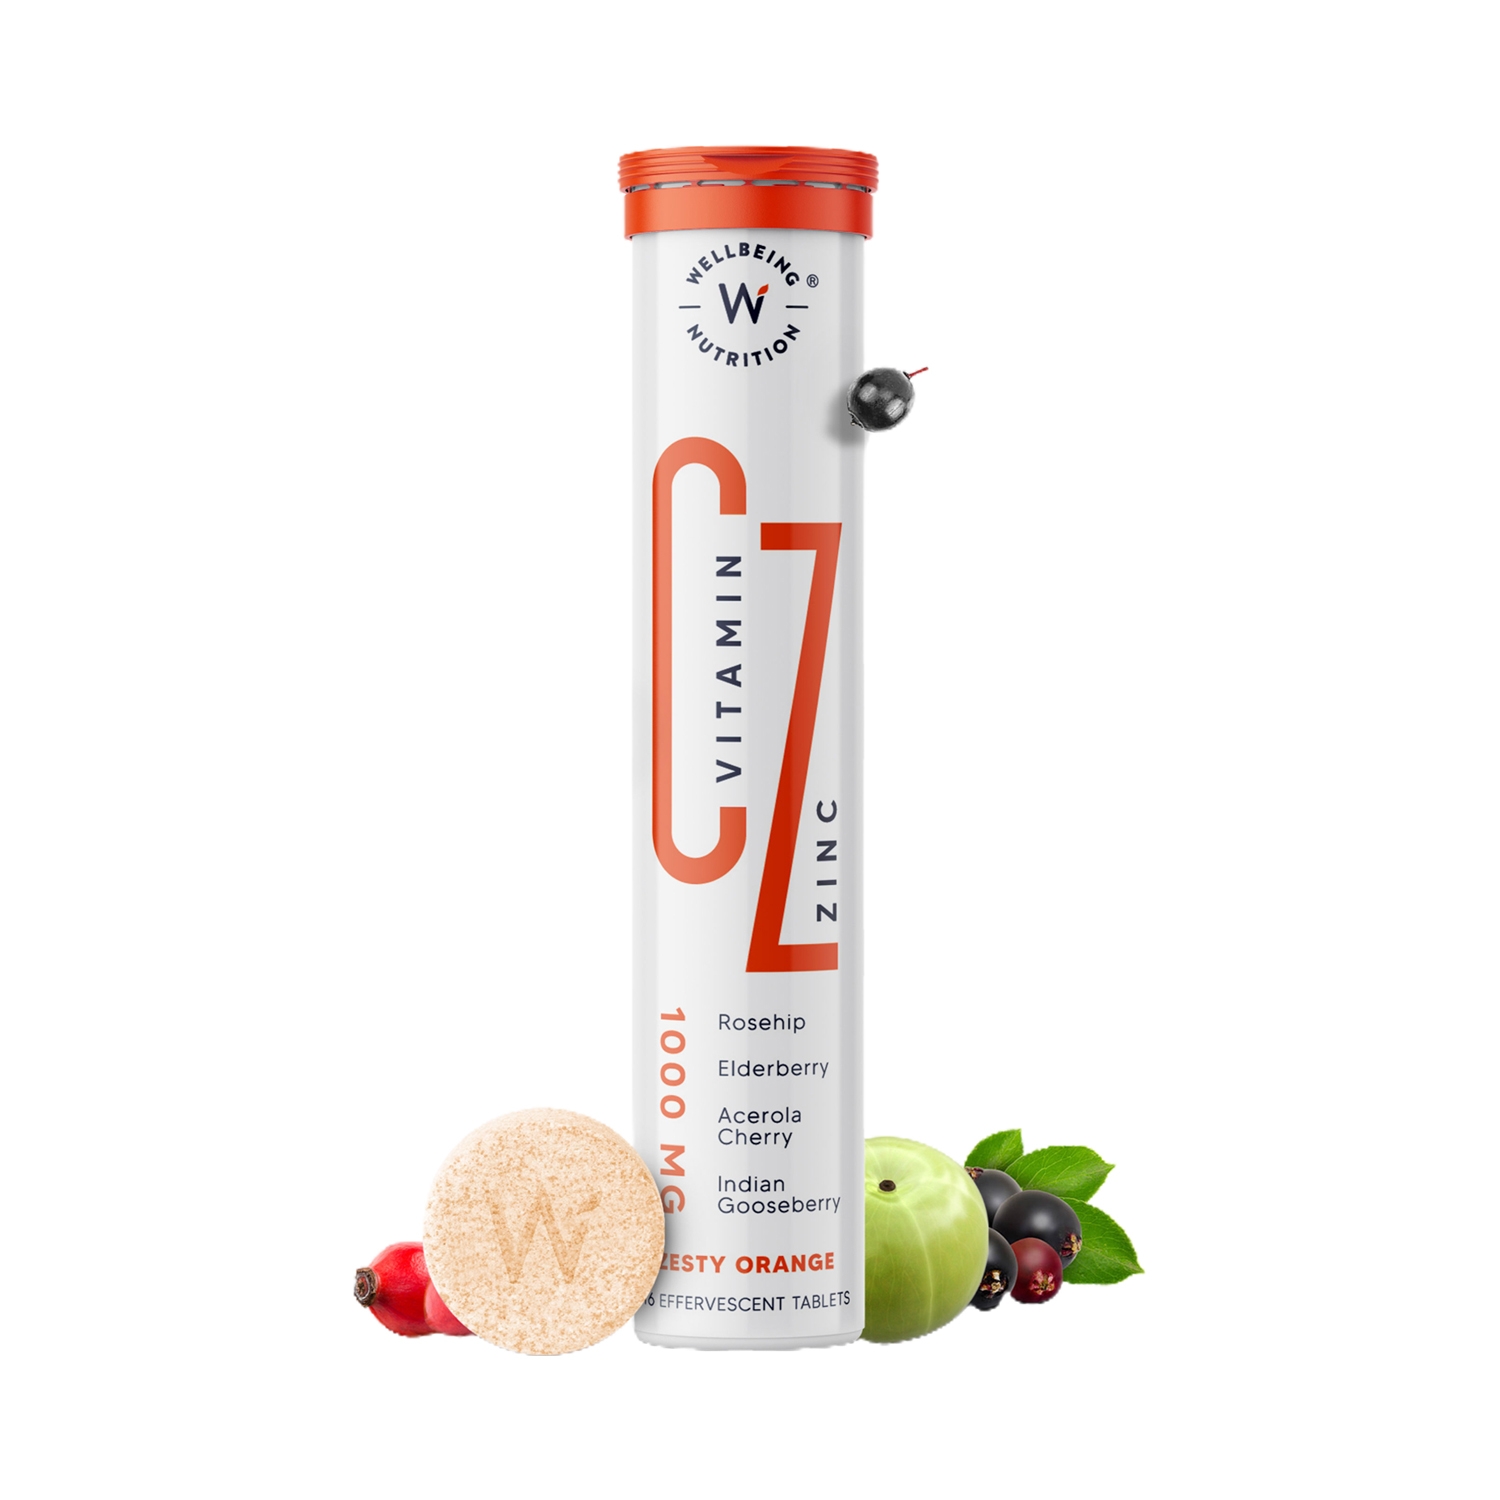 Wellbeing Nutrition | Wellbeing Nutrition Vitamin C + Zinc for Immunity, Antioxidants and Anti-aging